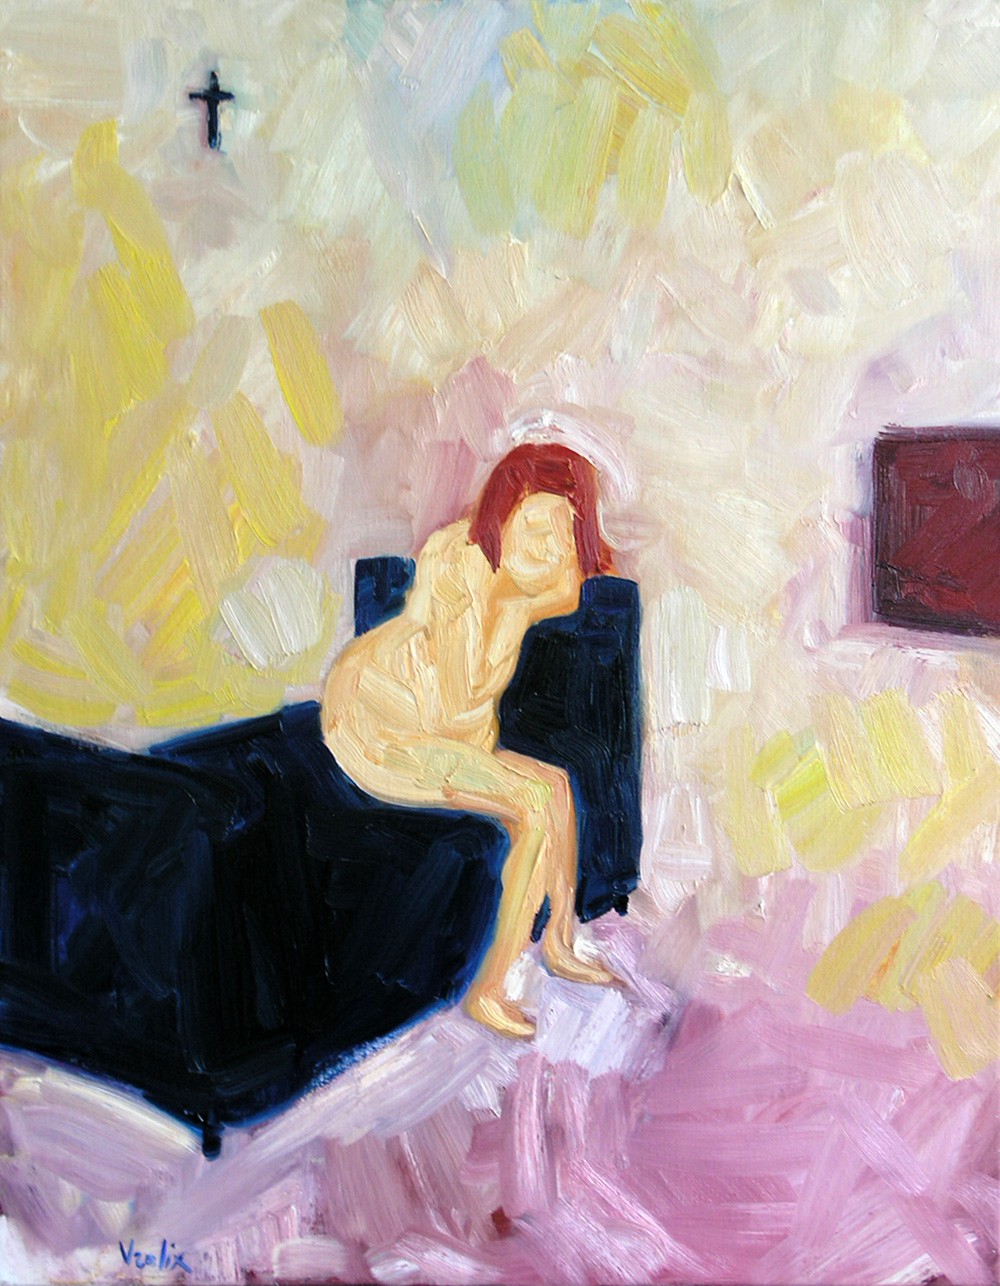 Pregnant!, a painting by Guido Vrolix